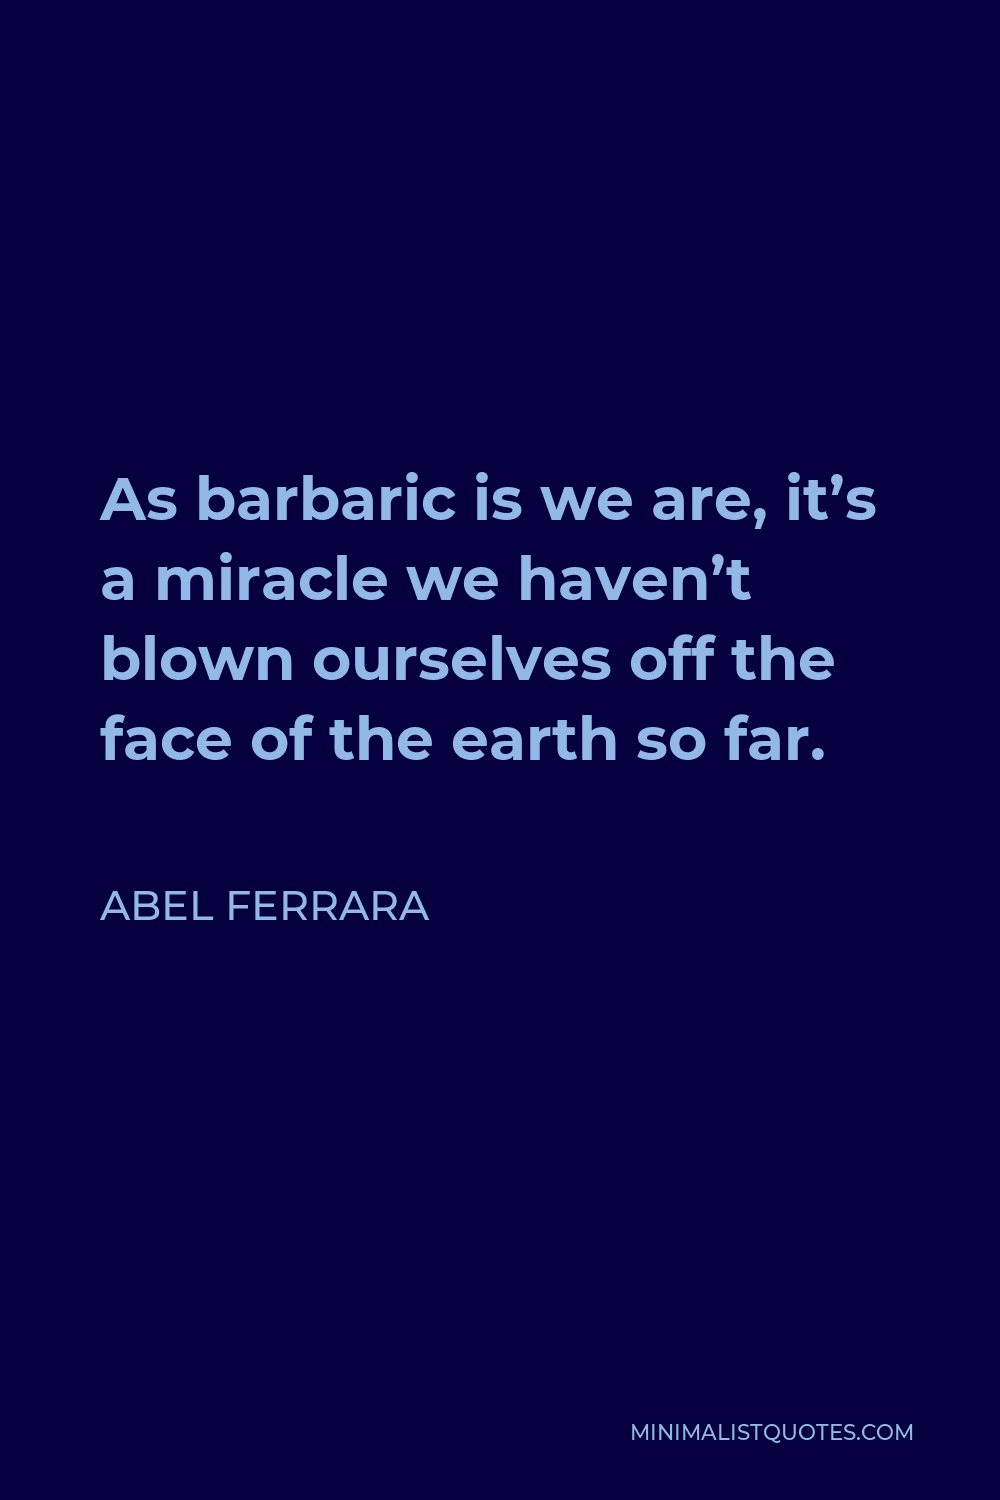 Abel Ferrara Quote - As barbaric is we are, it’s a miracle we haven’t blown ourselves off the face of the earth so far.